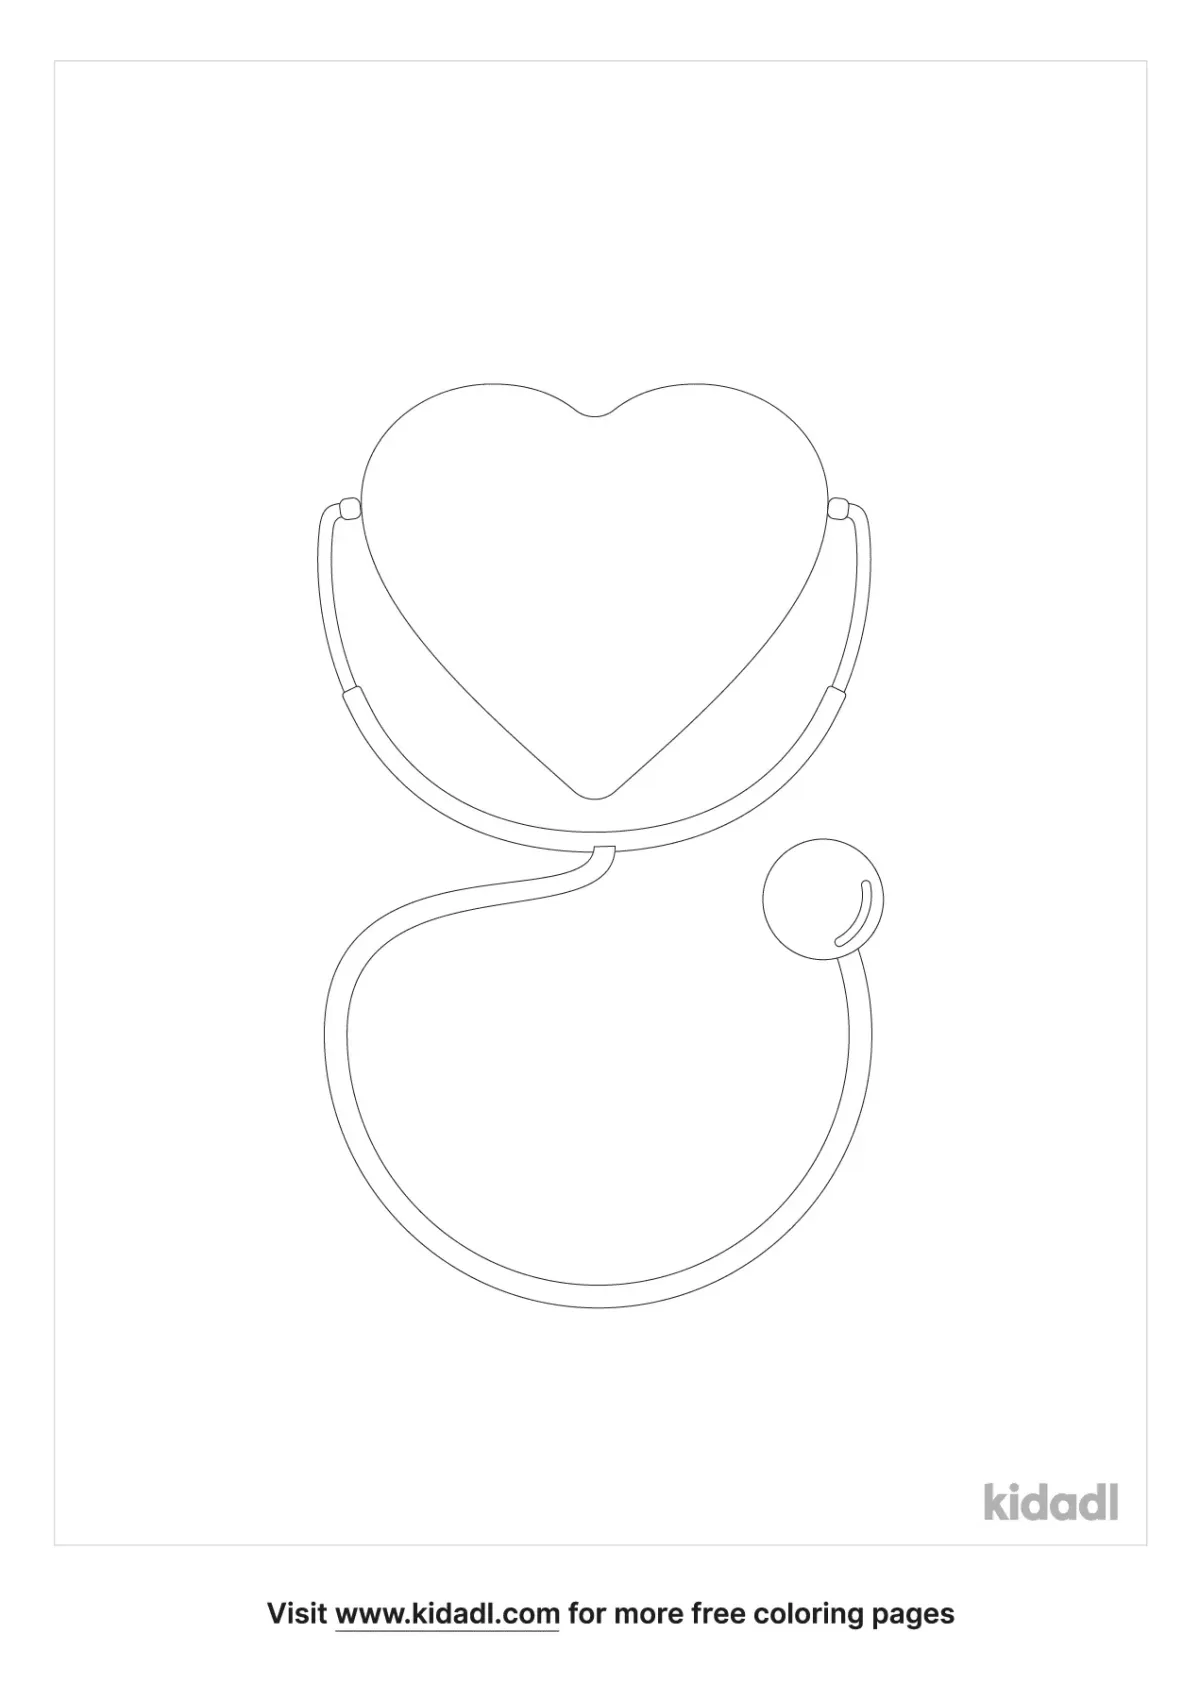 Stethoscope And Heart